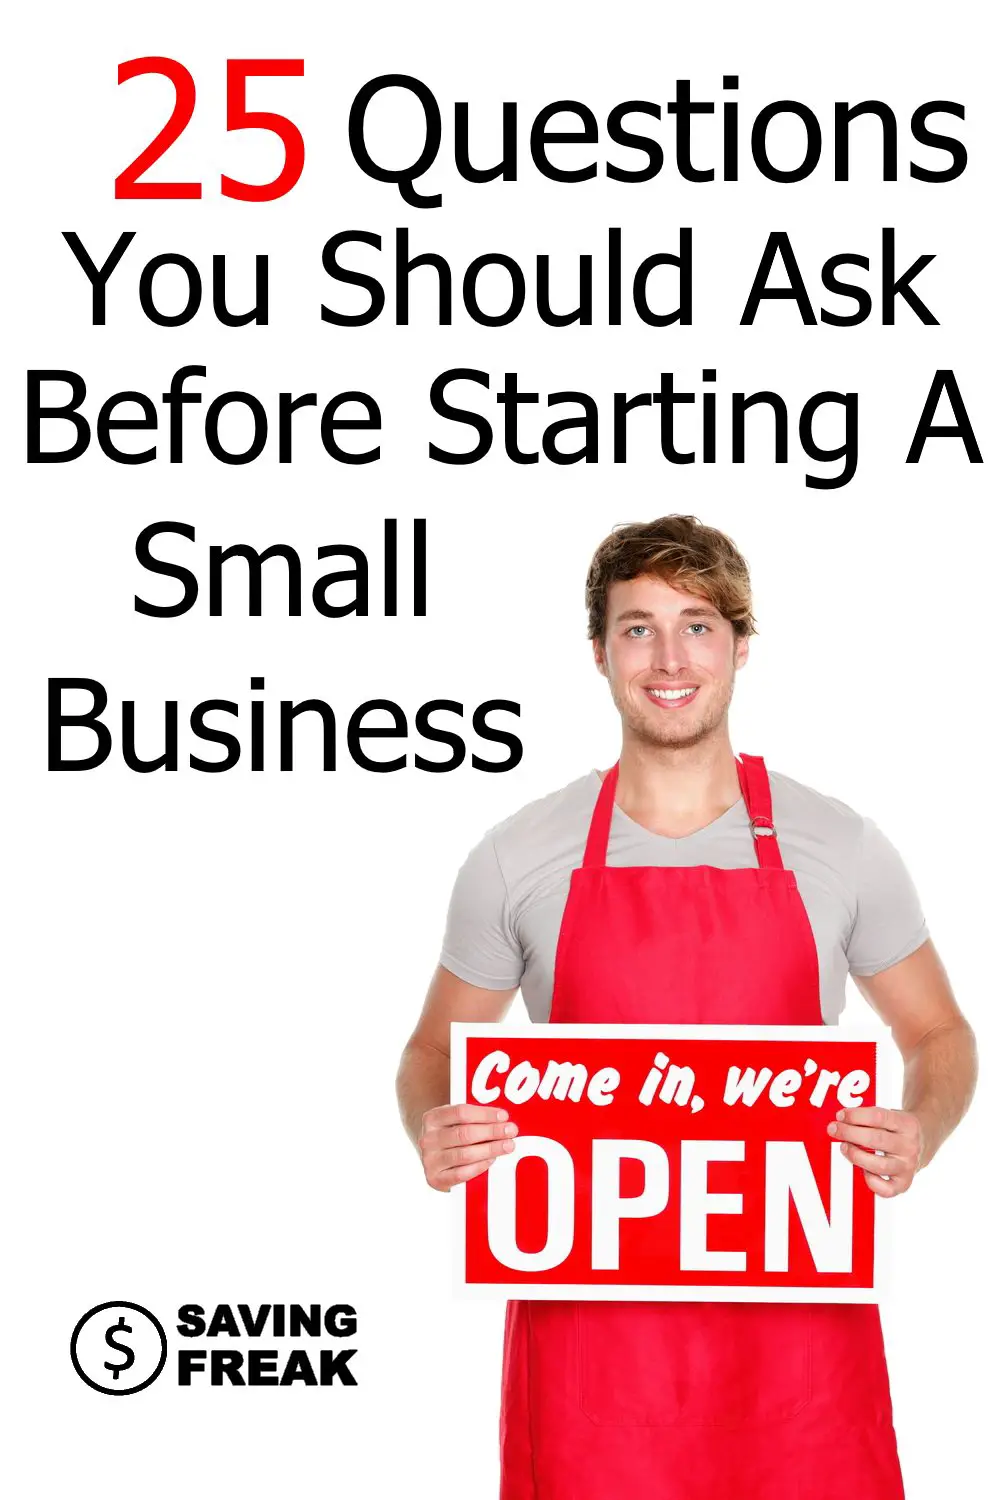 questions to ask before starting a small business